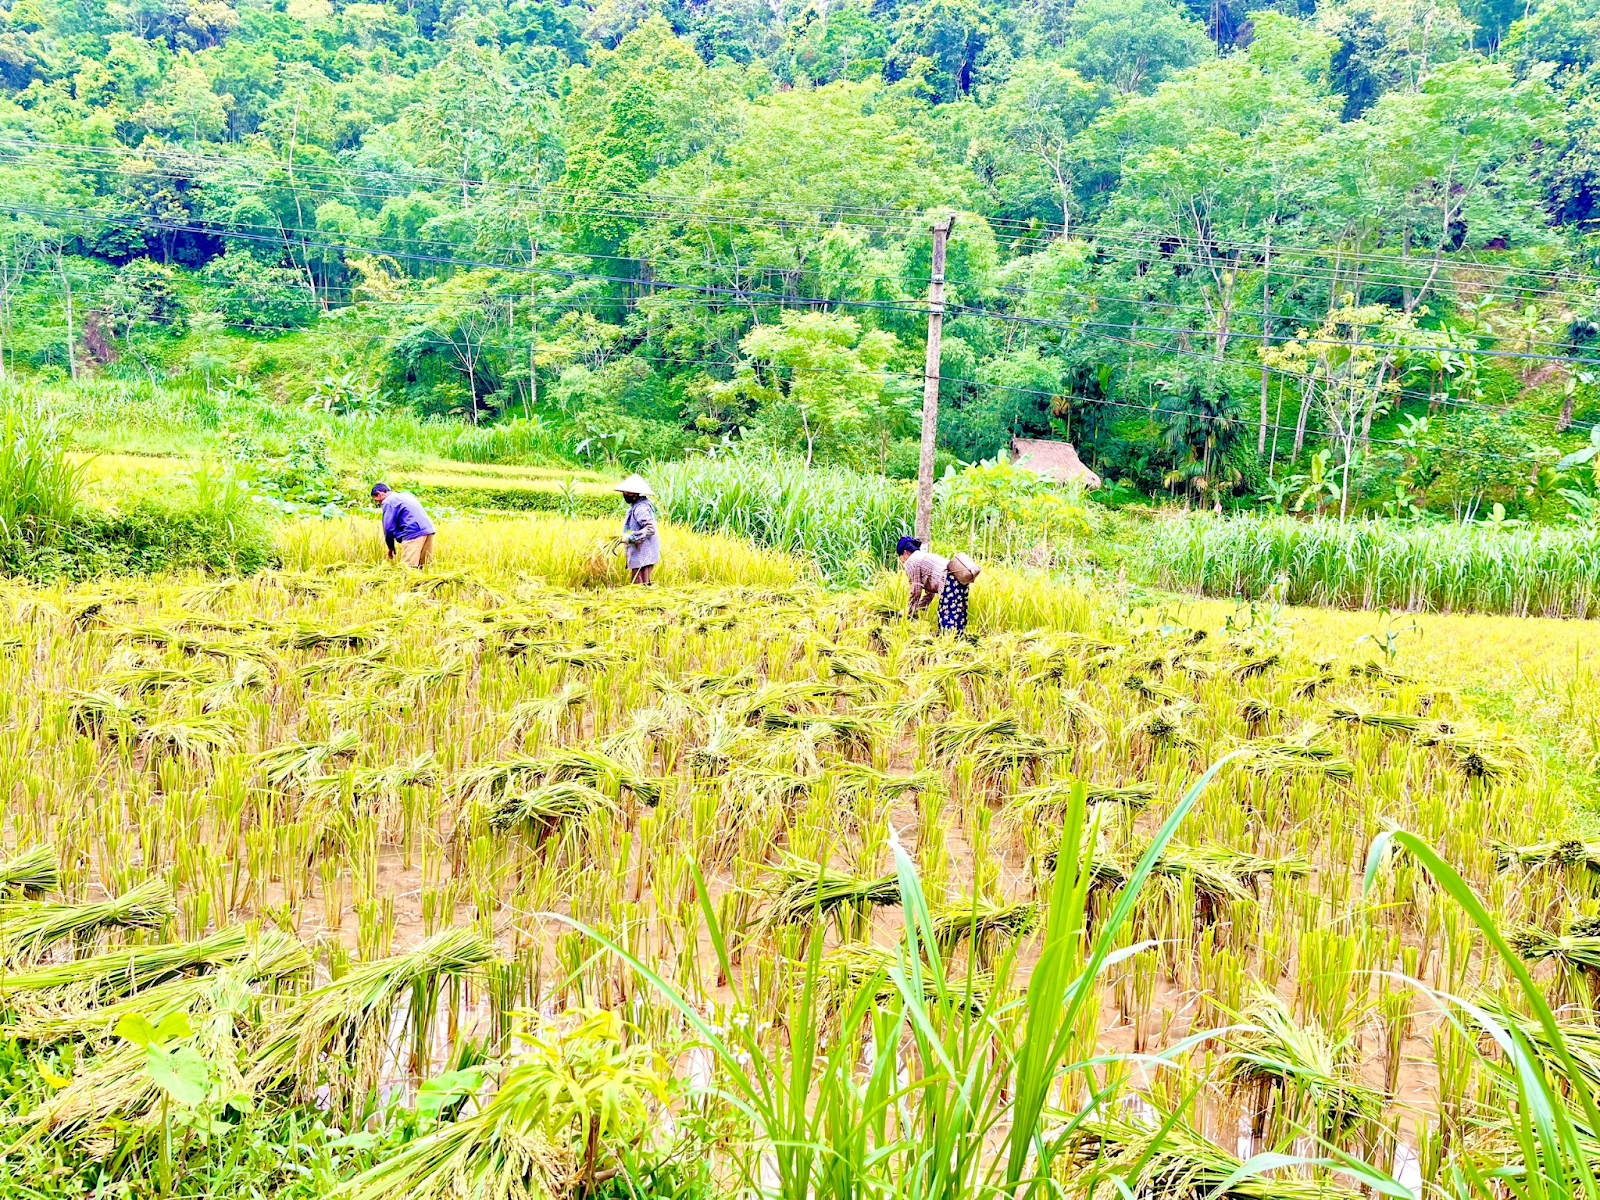 Farmers harvest rice in Pu Luong